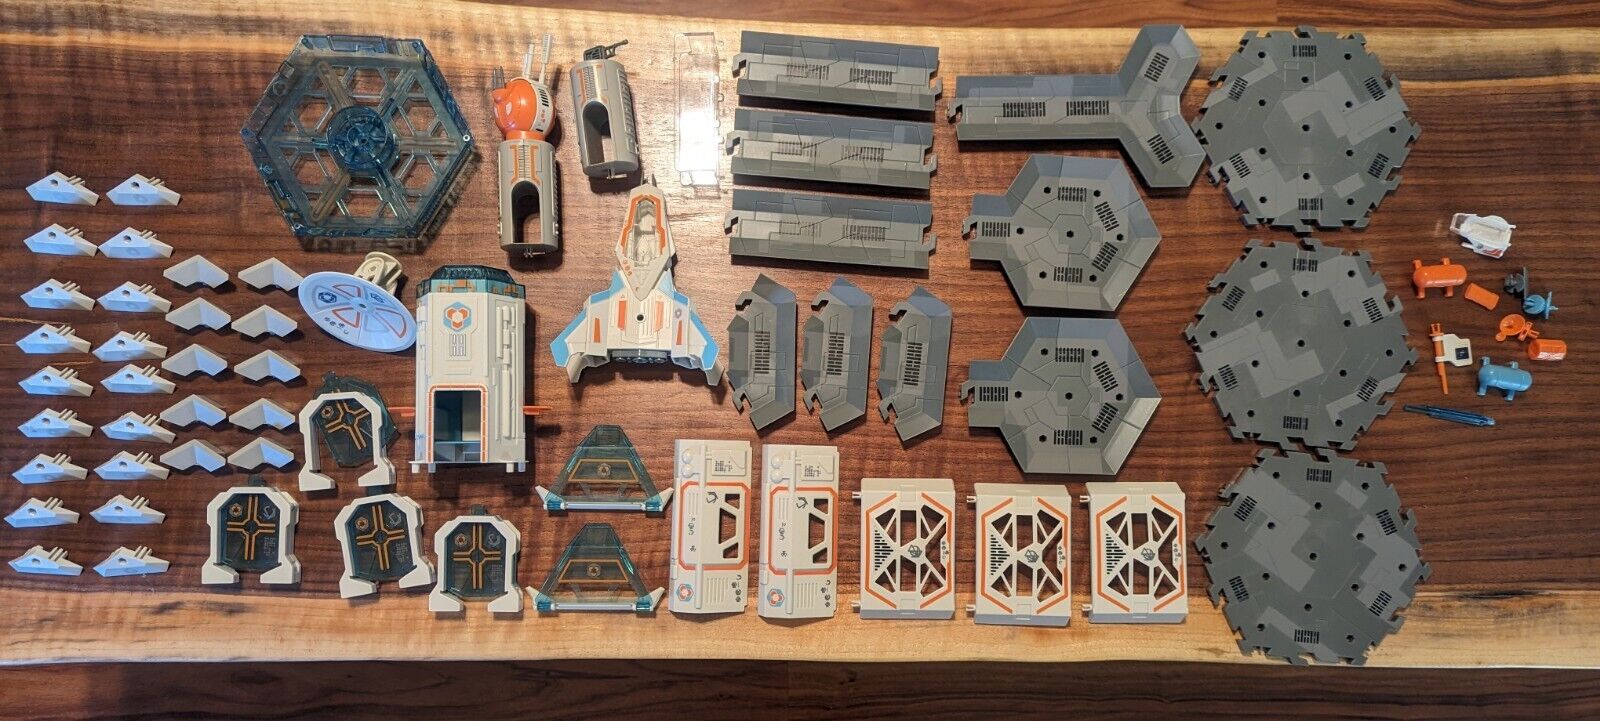 Hexbug Nano Space Hex Bug Parts Lot 68 Pieces Discovery Station Ship Satellite